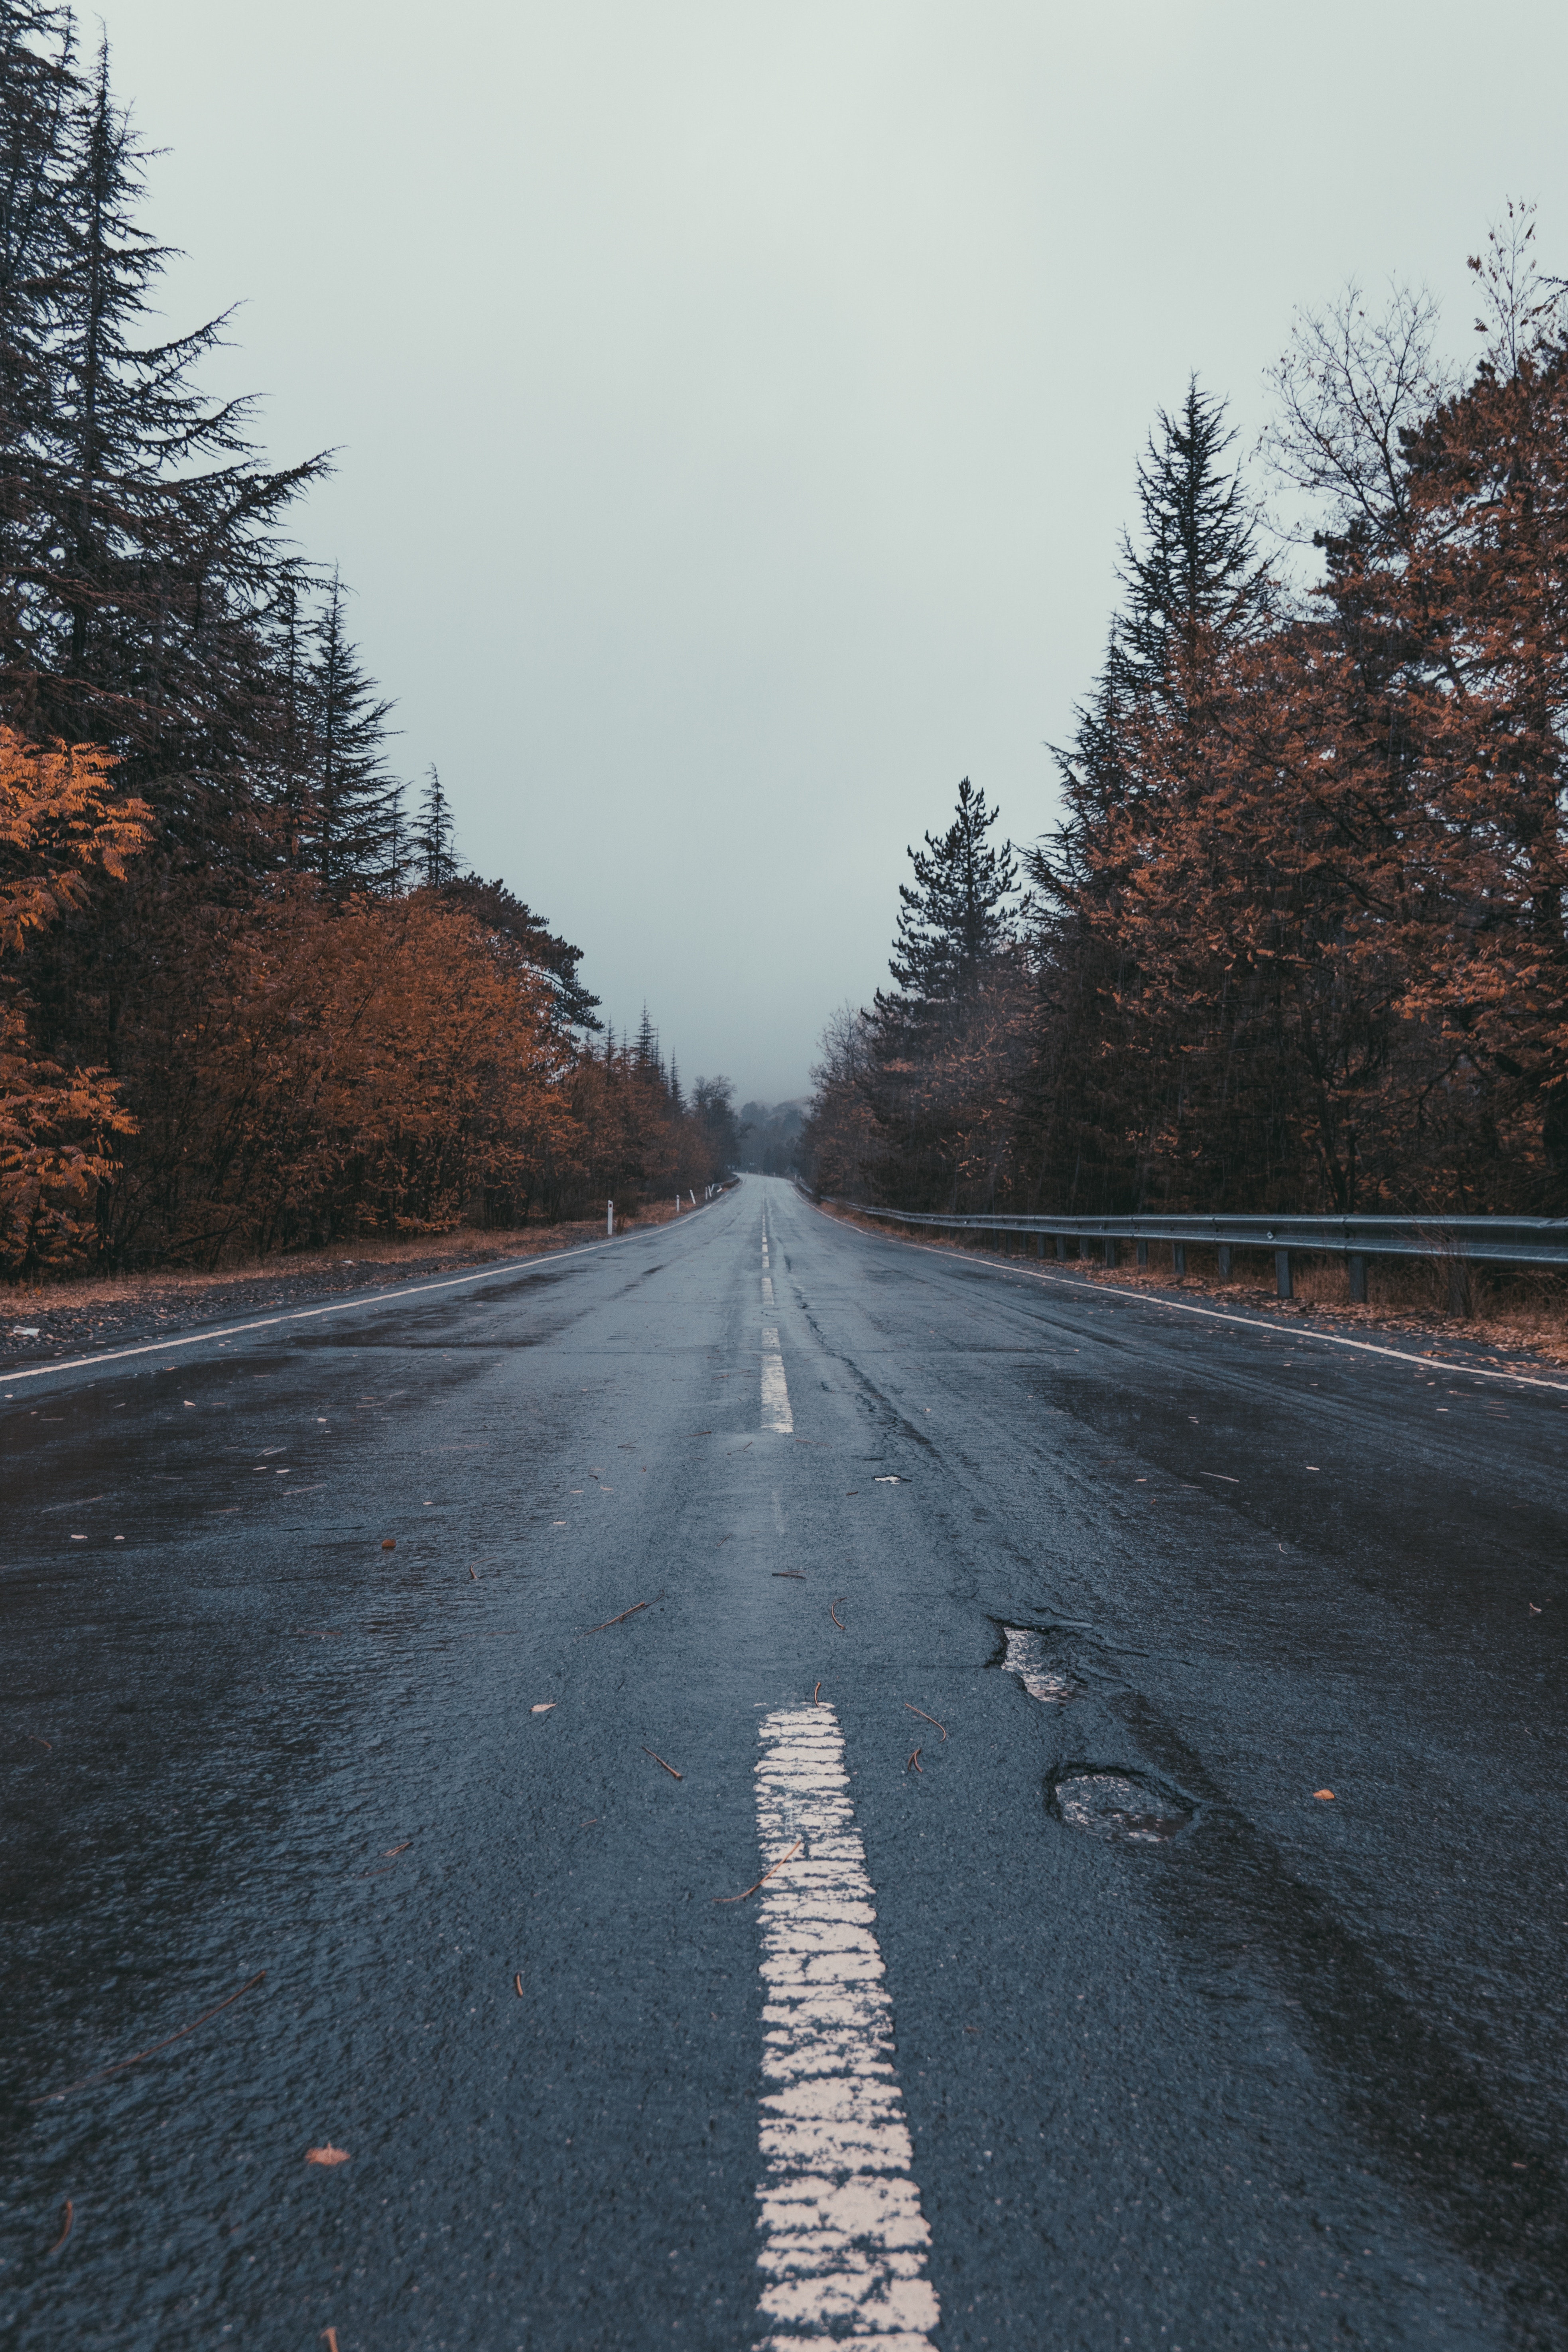 mainly cloudy, nature, trees, road, markup, overcast UHD